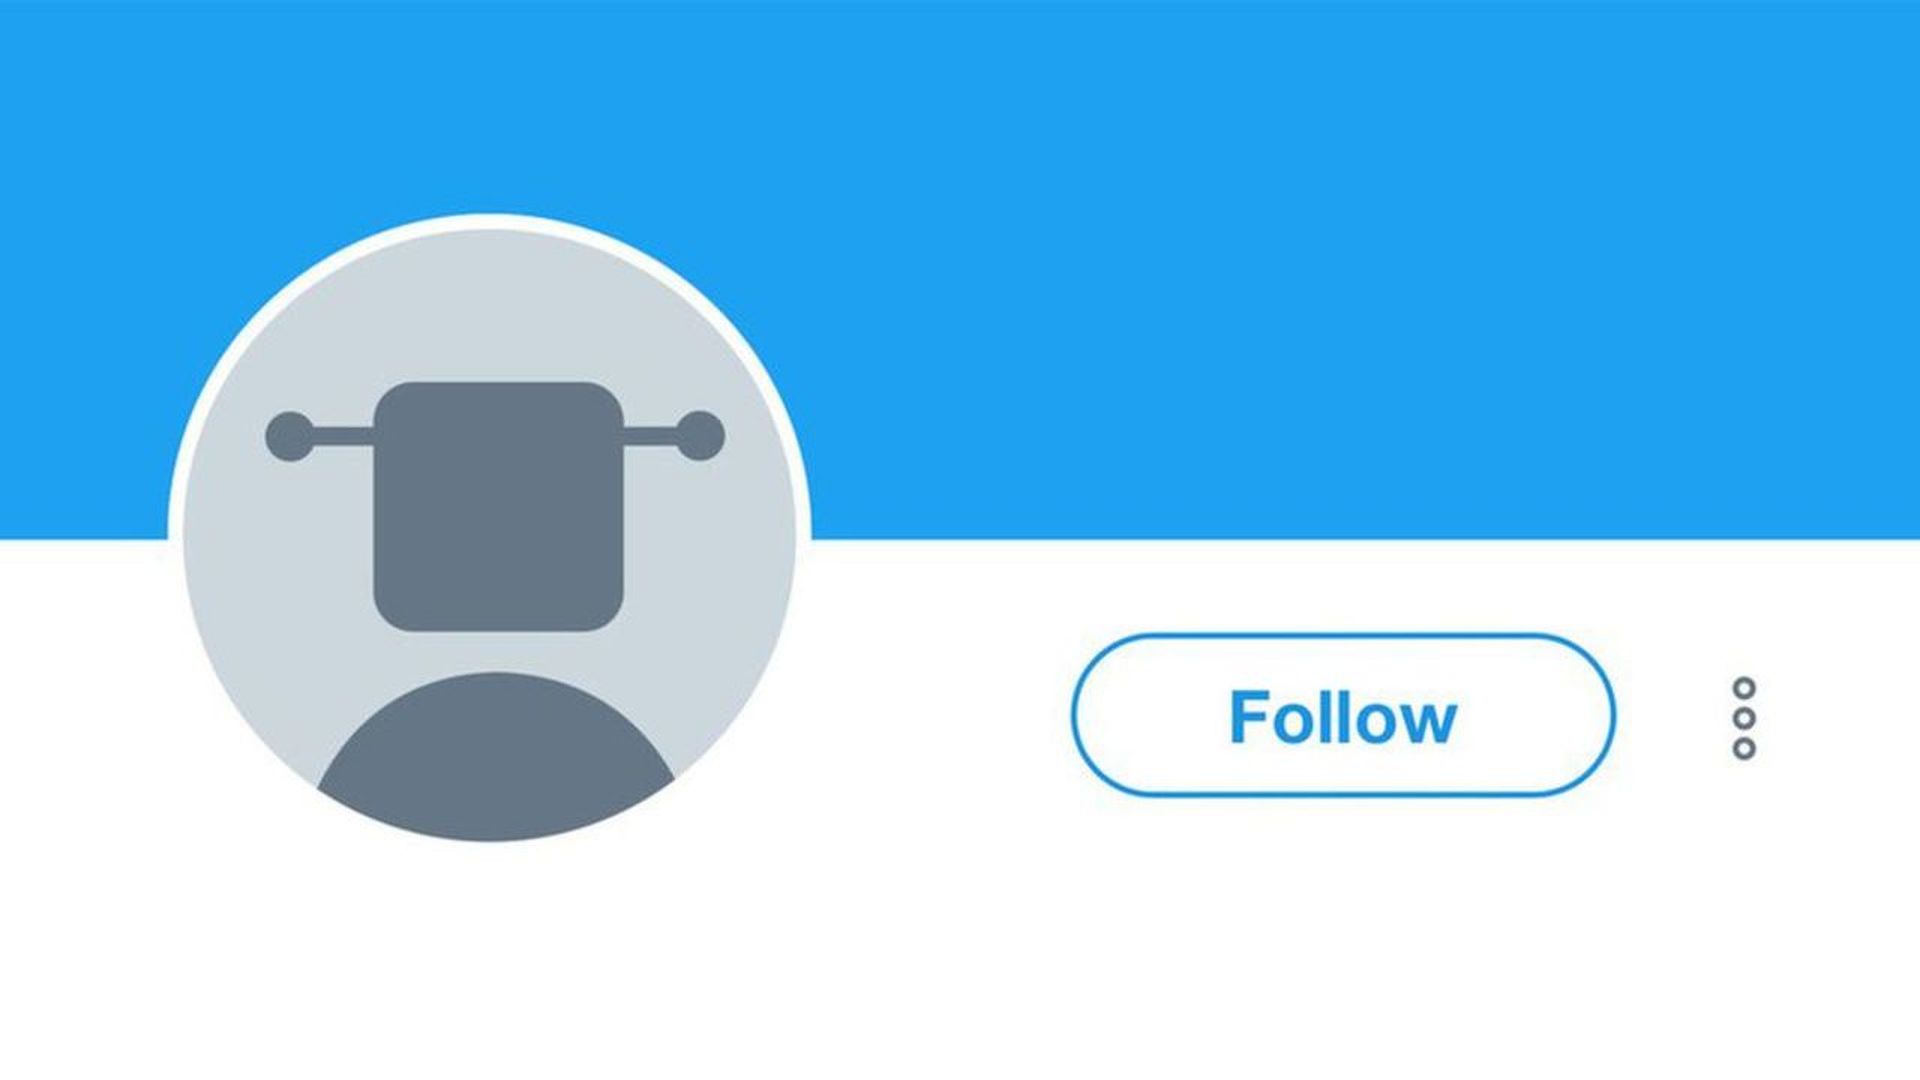 A twitter profile with a robot as the avatar